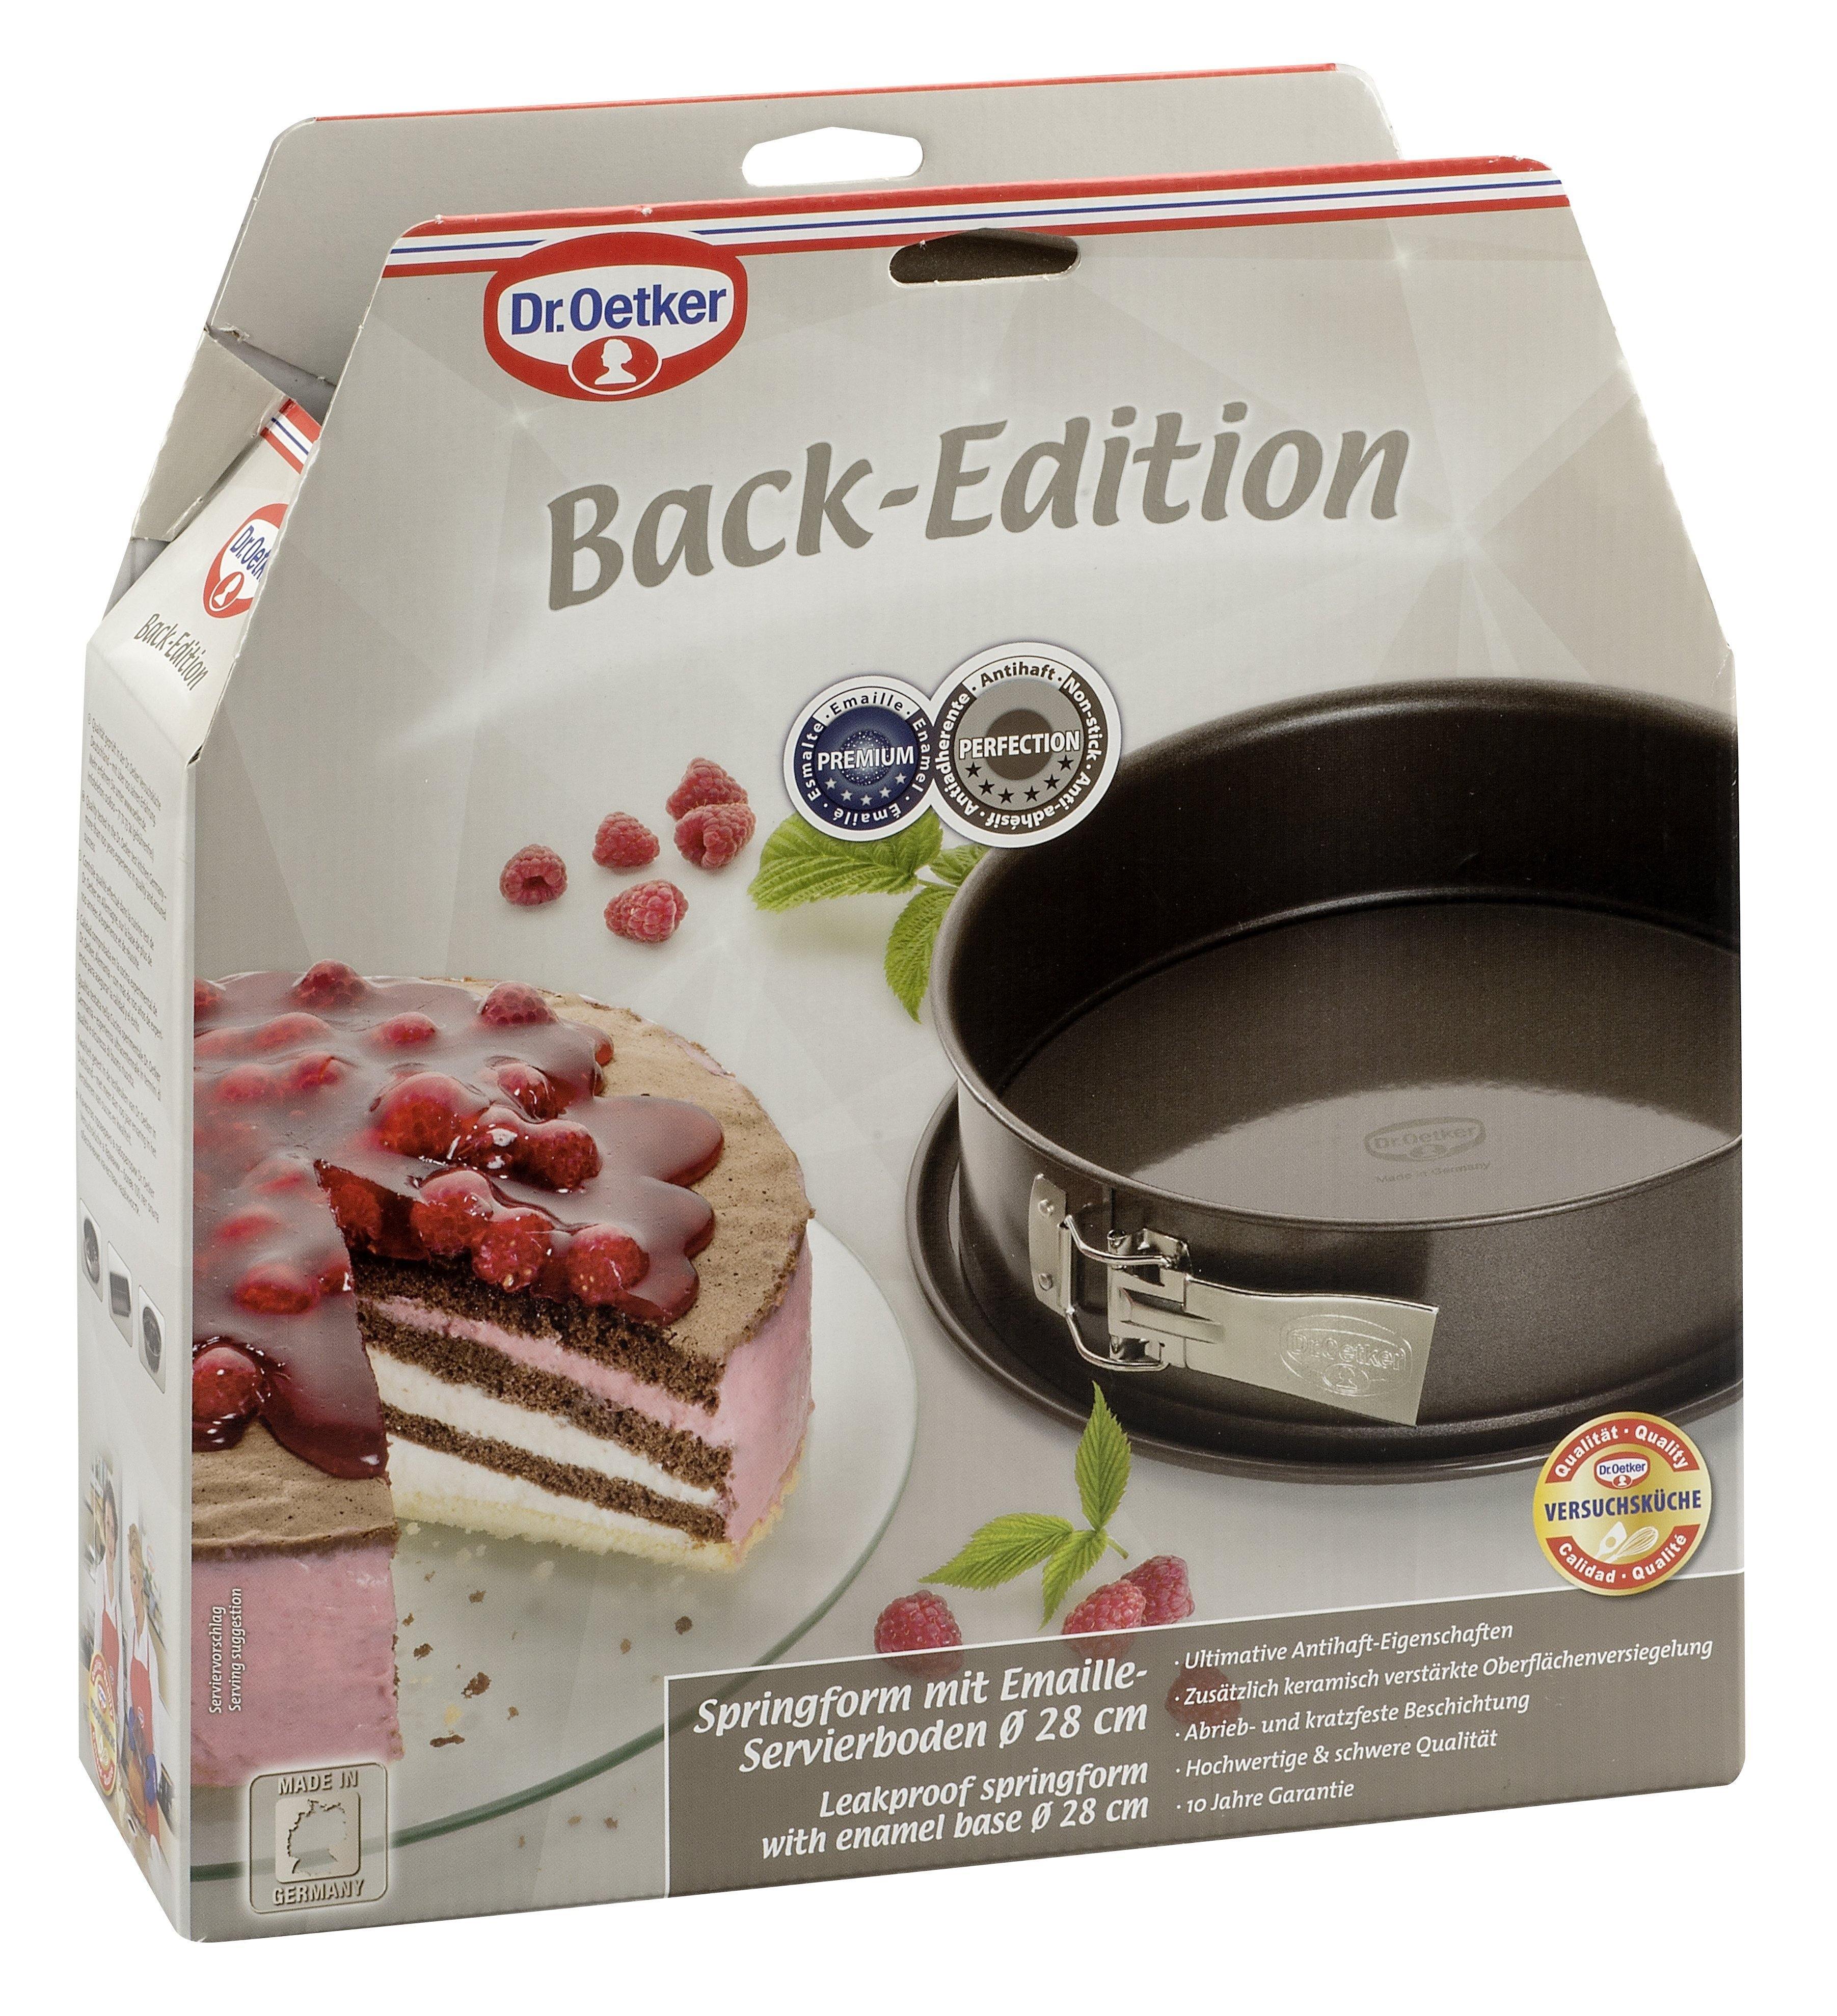 Dr. Oetker "Back-Edition" Springform With Enamel Base And Non-Stick Ring, Brown, 28X8 Cm - Whole and All